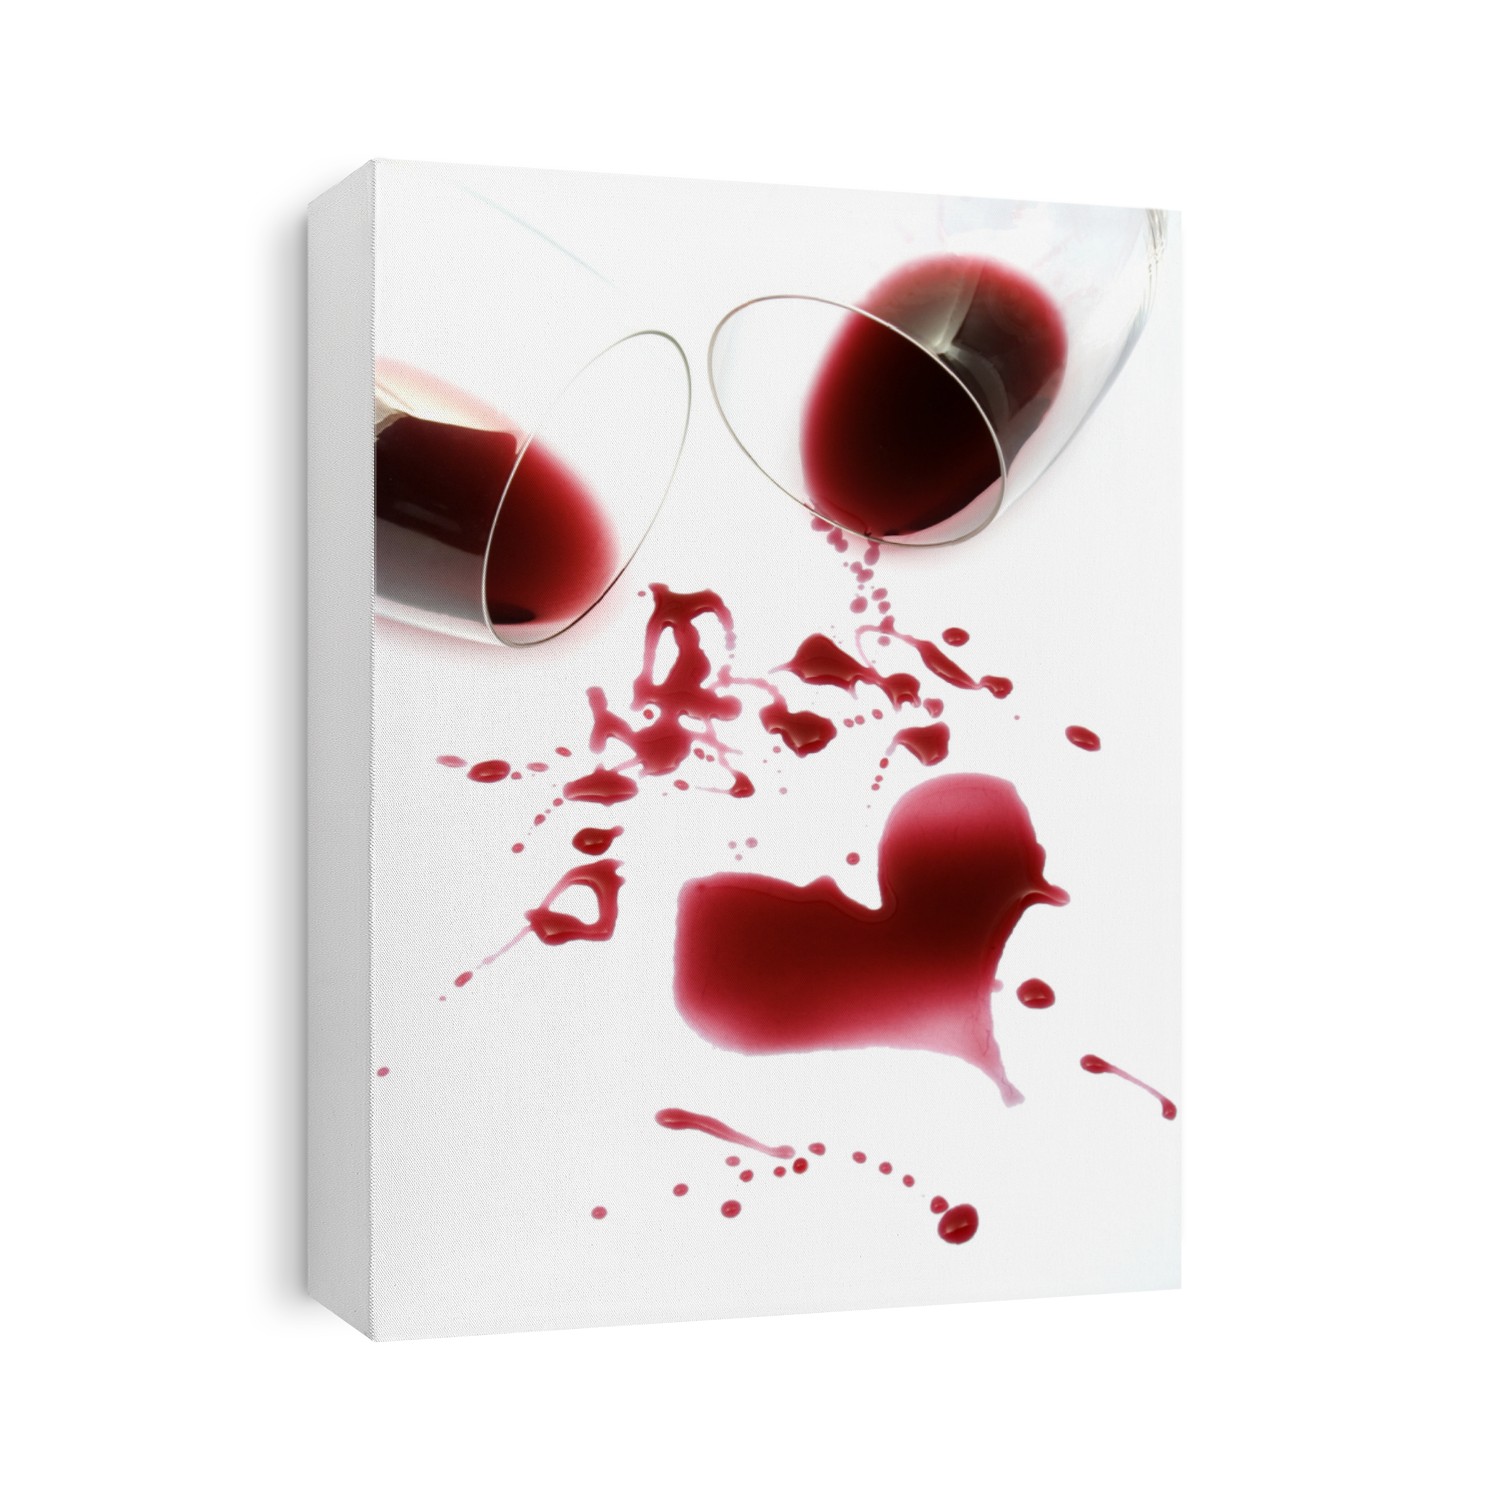 Red wine spilled from glasses forming a heart shape on white background